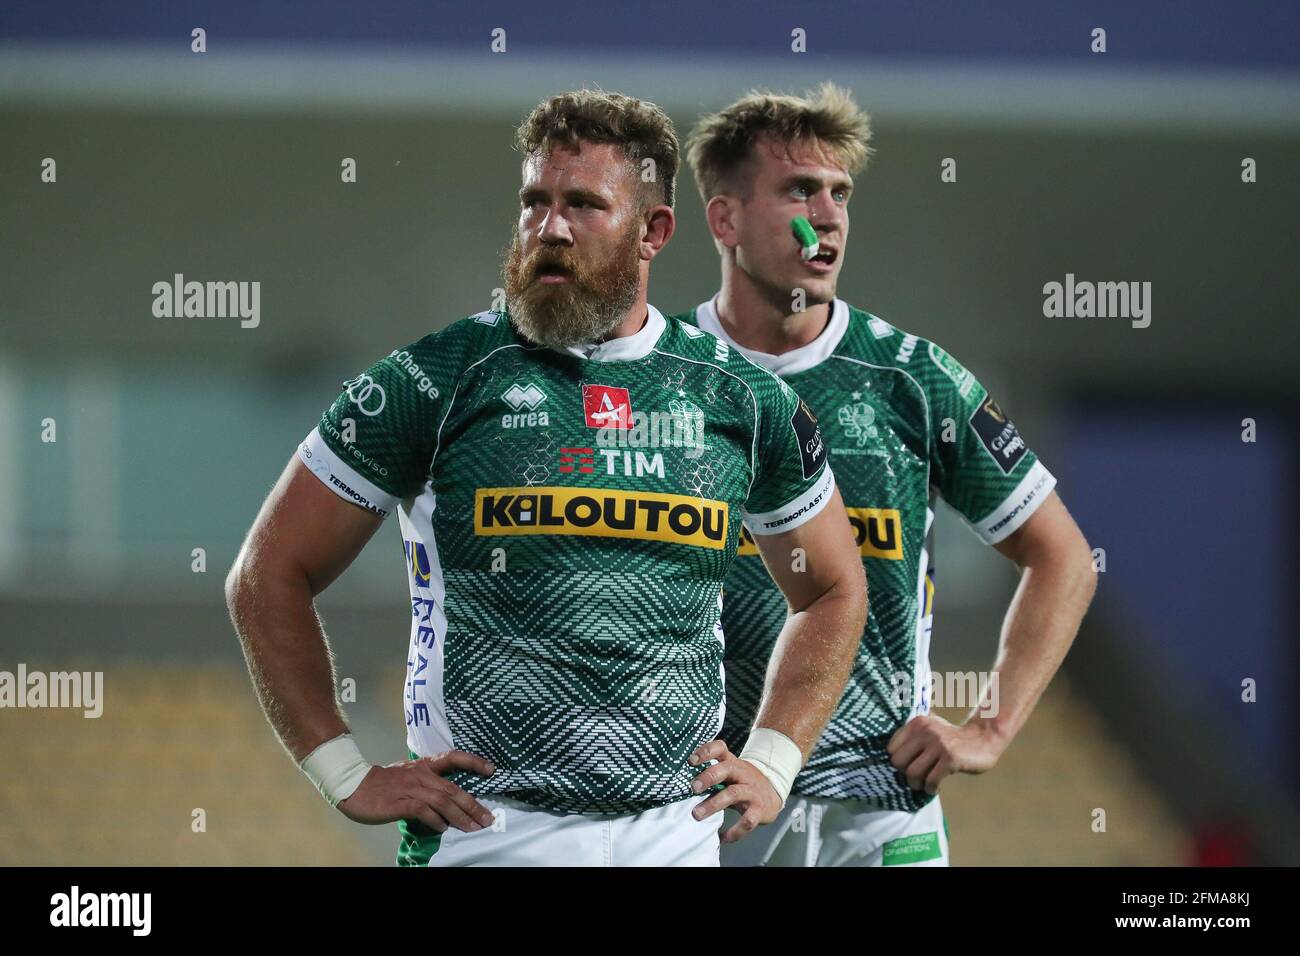 Parma, Italy. 07th May, 2021. Irne Herbst and Federico Ruzza (Benetton  rugby) during Rainbow Cup - Benetton Treviso vs Zebre Rugby, Rugby Guinness  Pro 14 match in Parma, Italy, May 07 2021